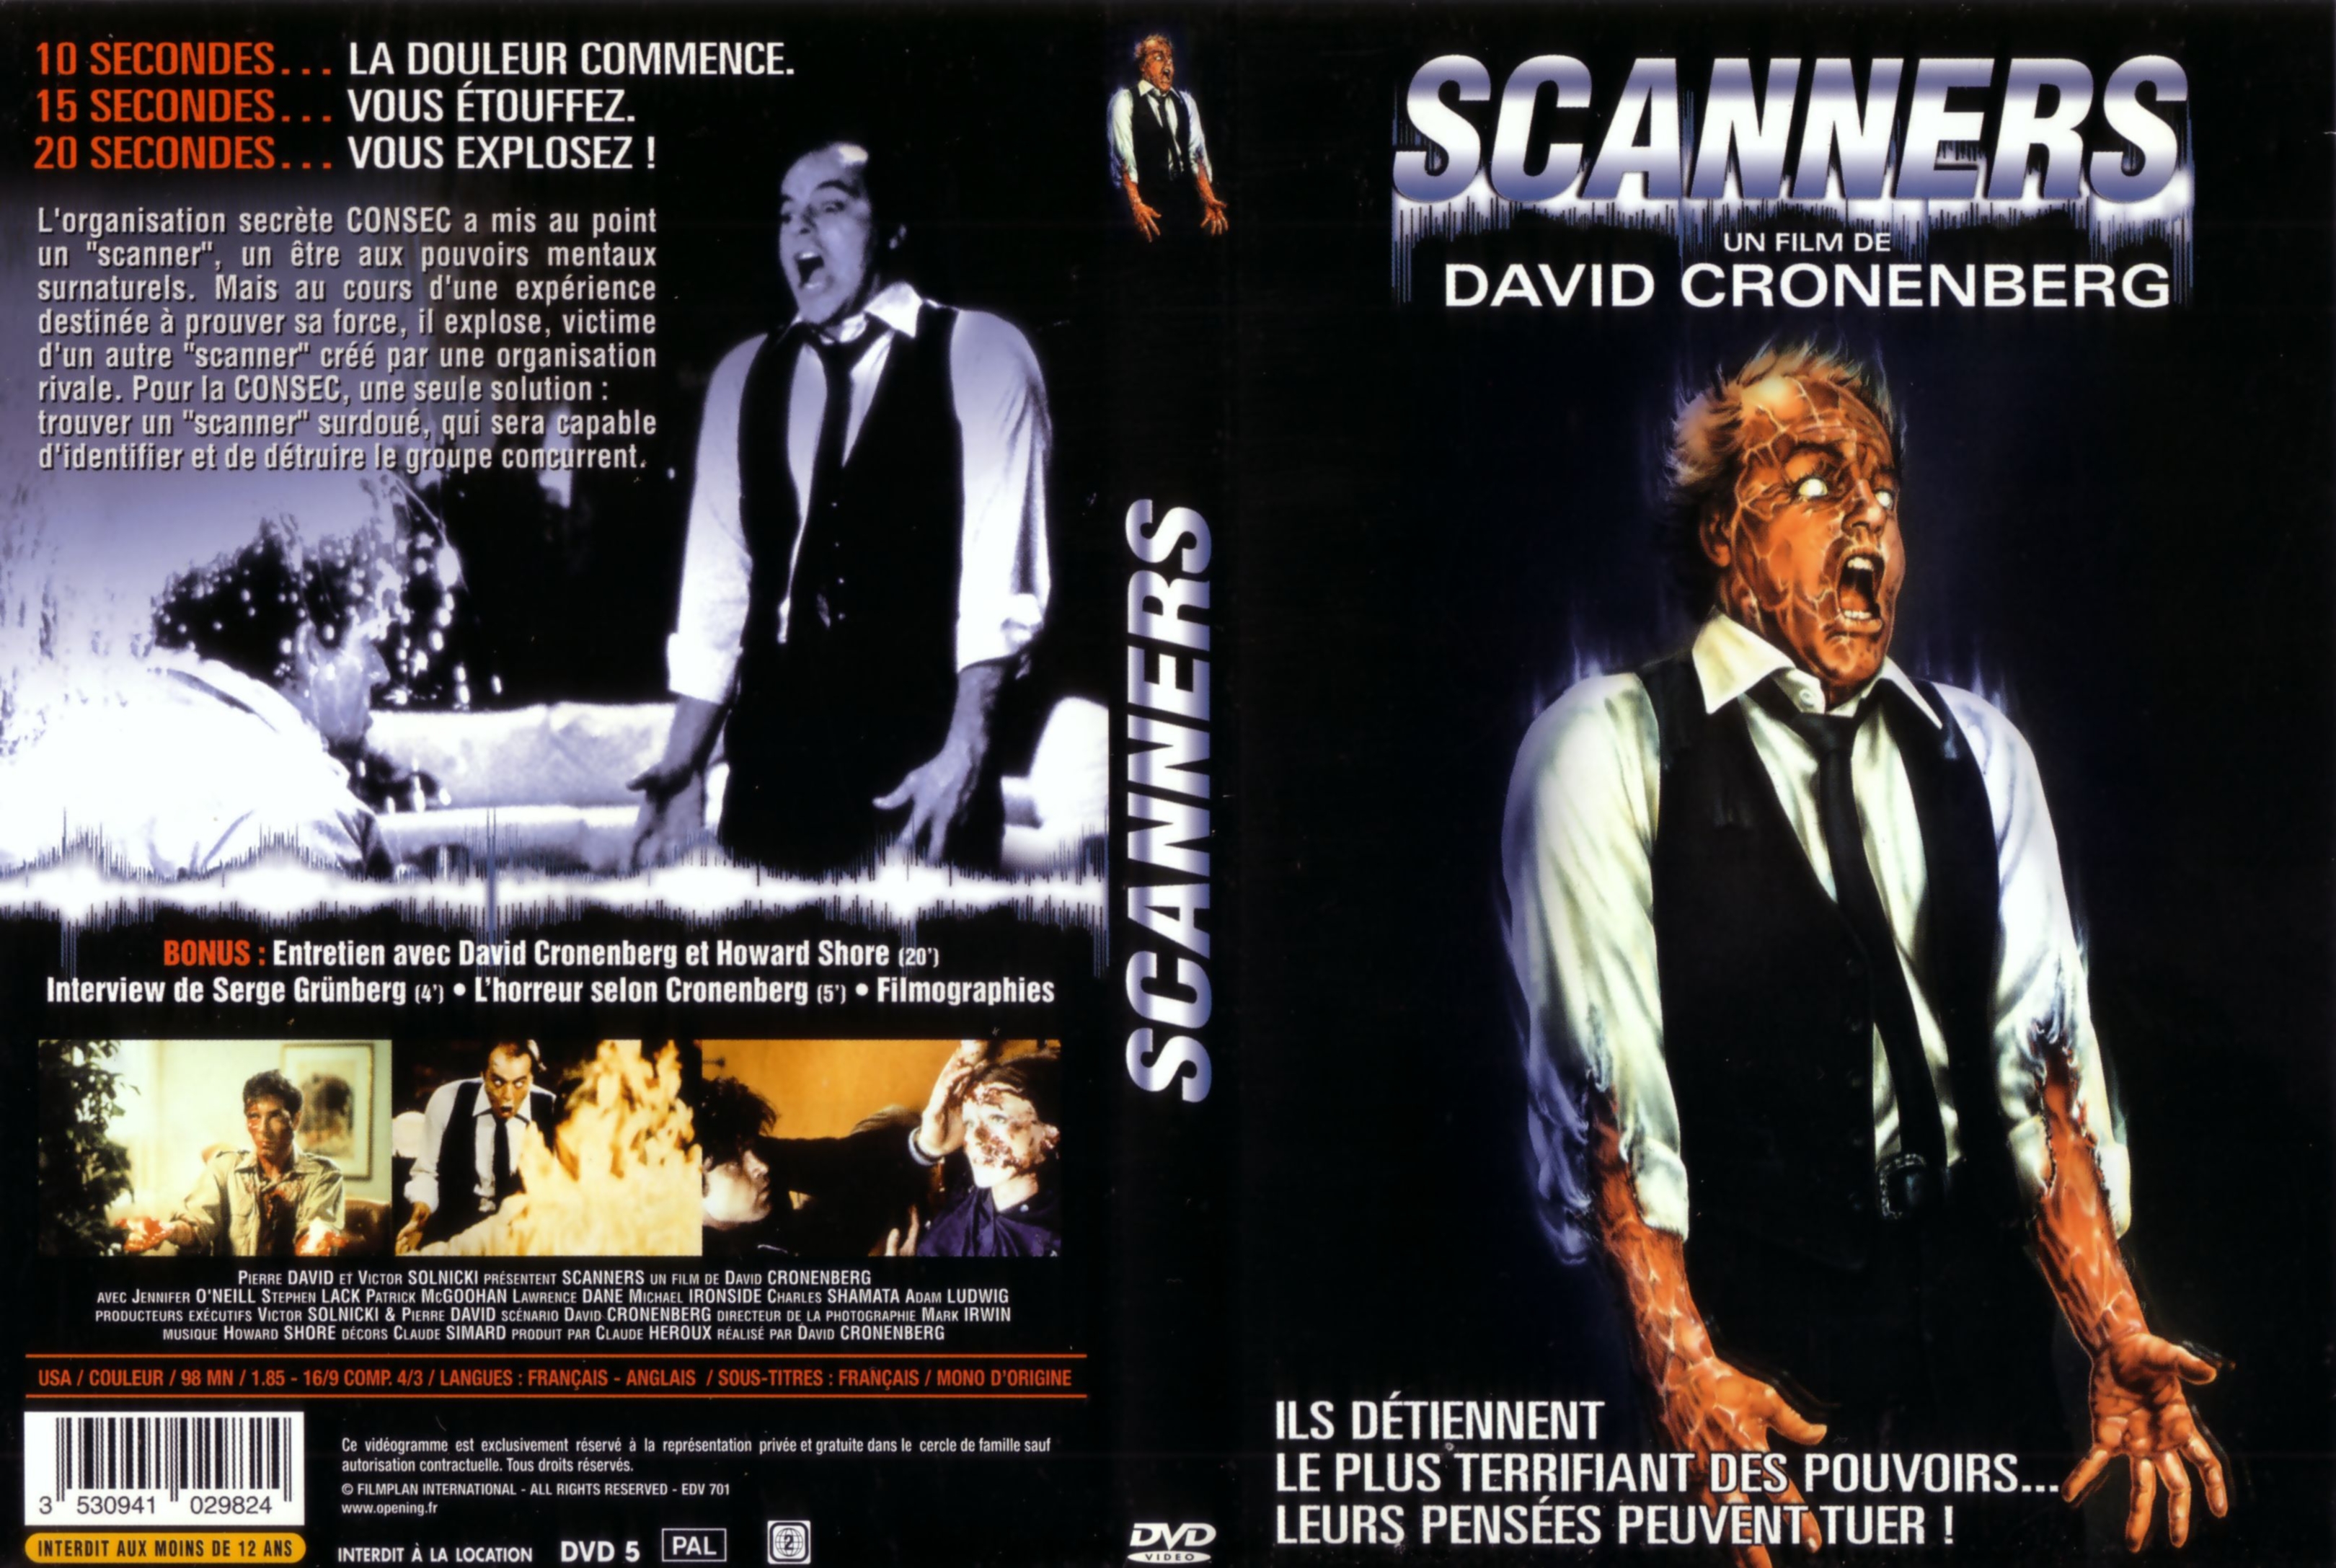 Jaquette DVD Scanners